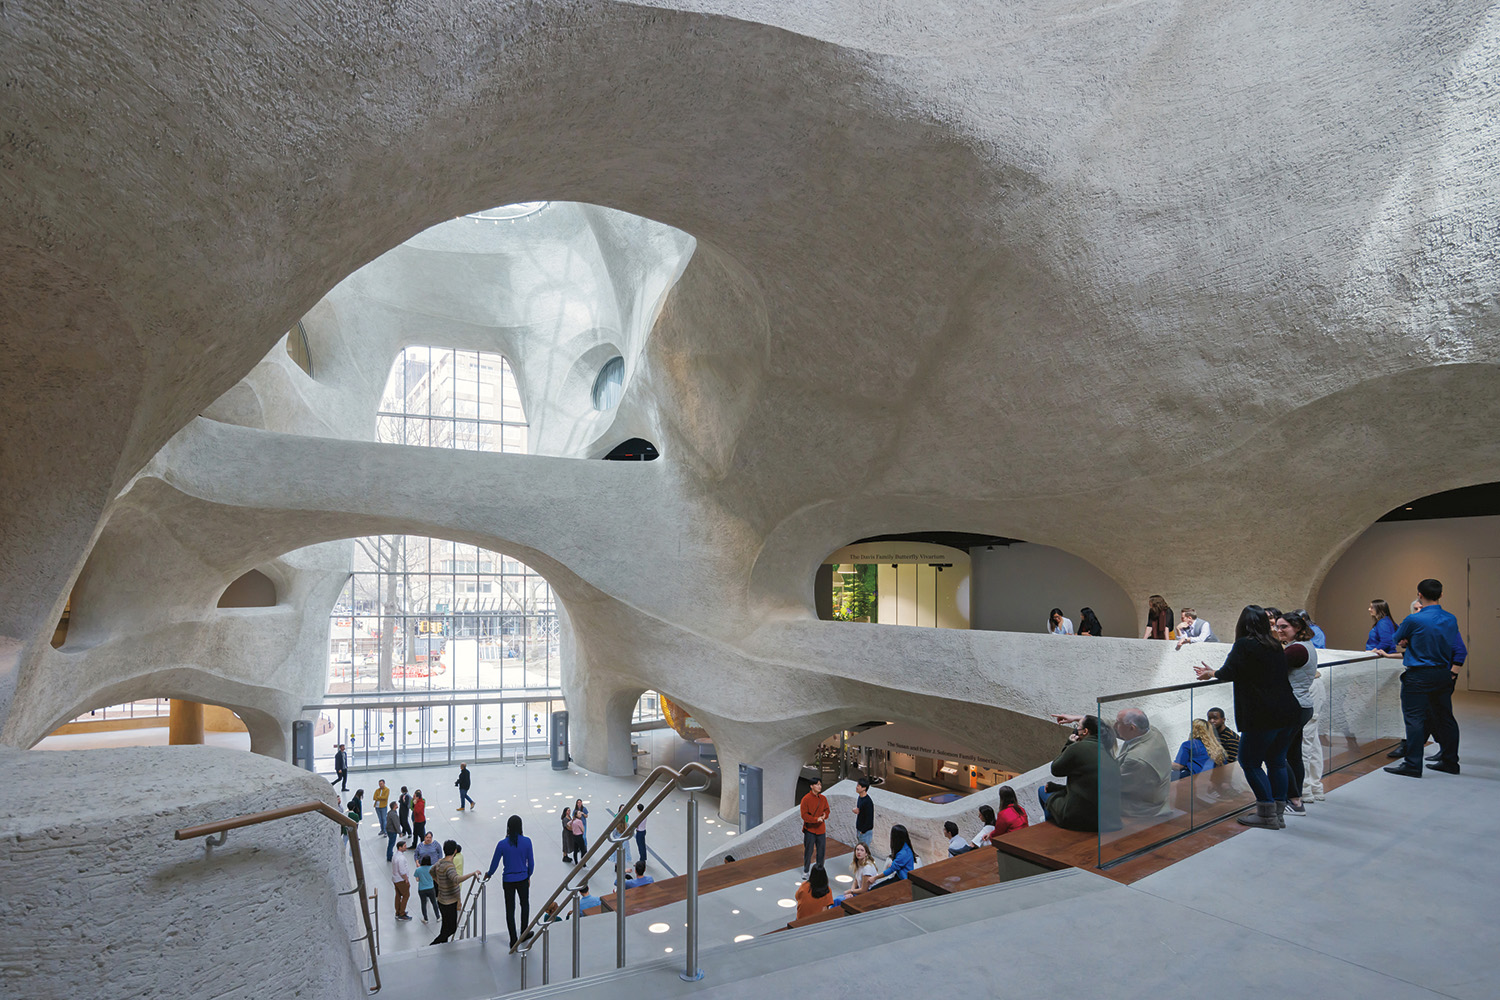 A photograph of the interior of a museum with cave-like architecture. People are exploring the space, which features flowing concrete walls and openings that resemble windows and portals. Natural light illuminates the space. 